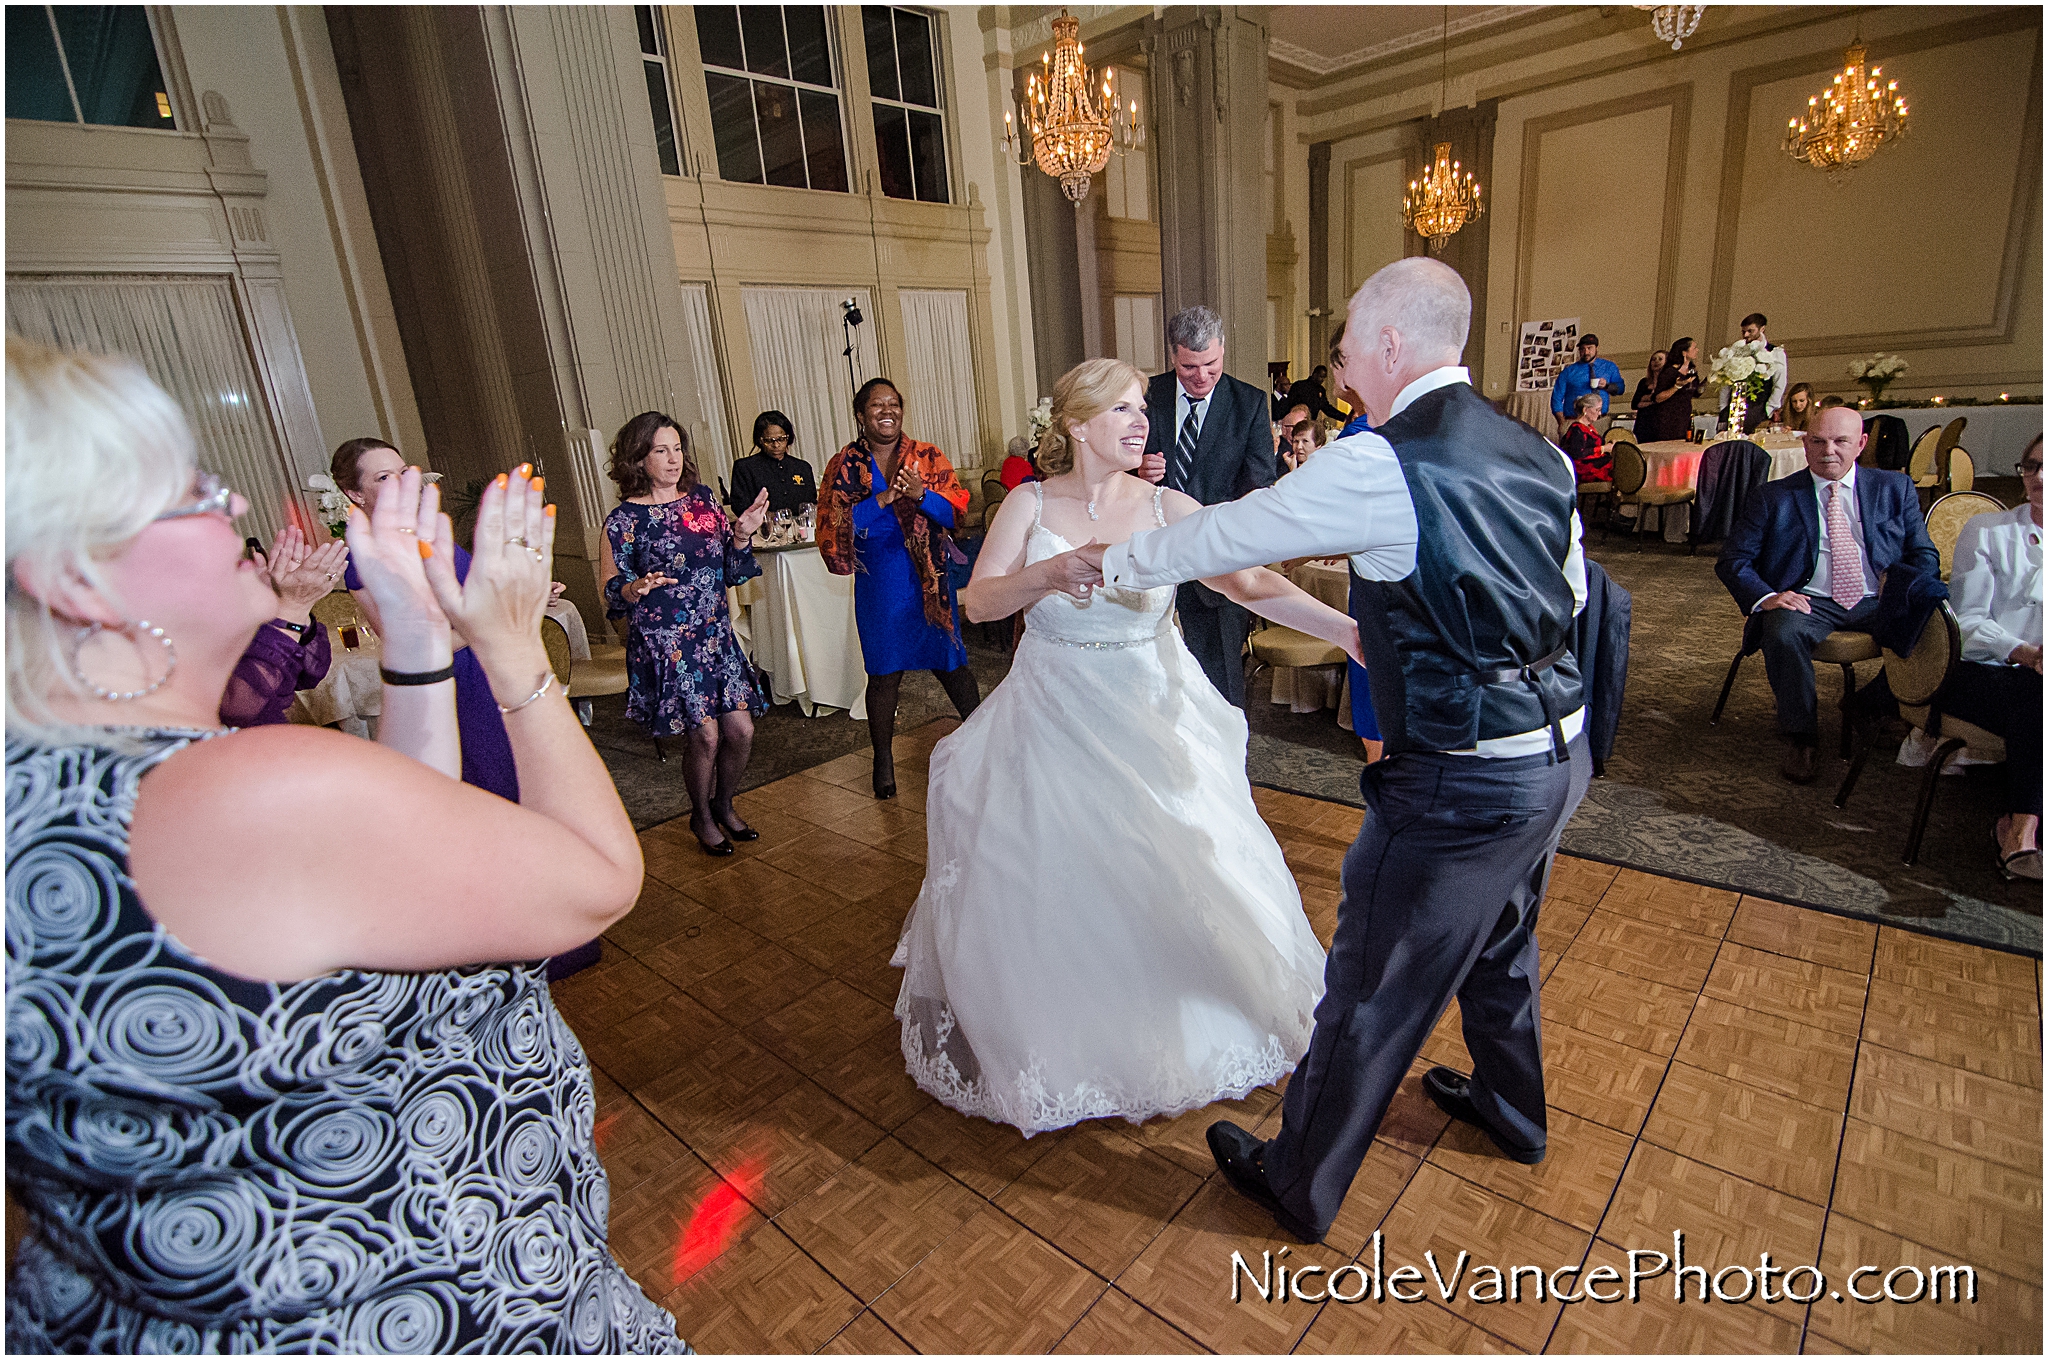 The bride and groom enjoy their reception at the Hotel John Marshall.